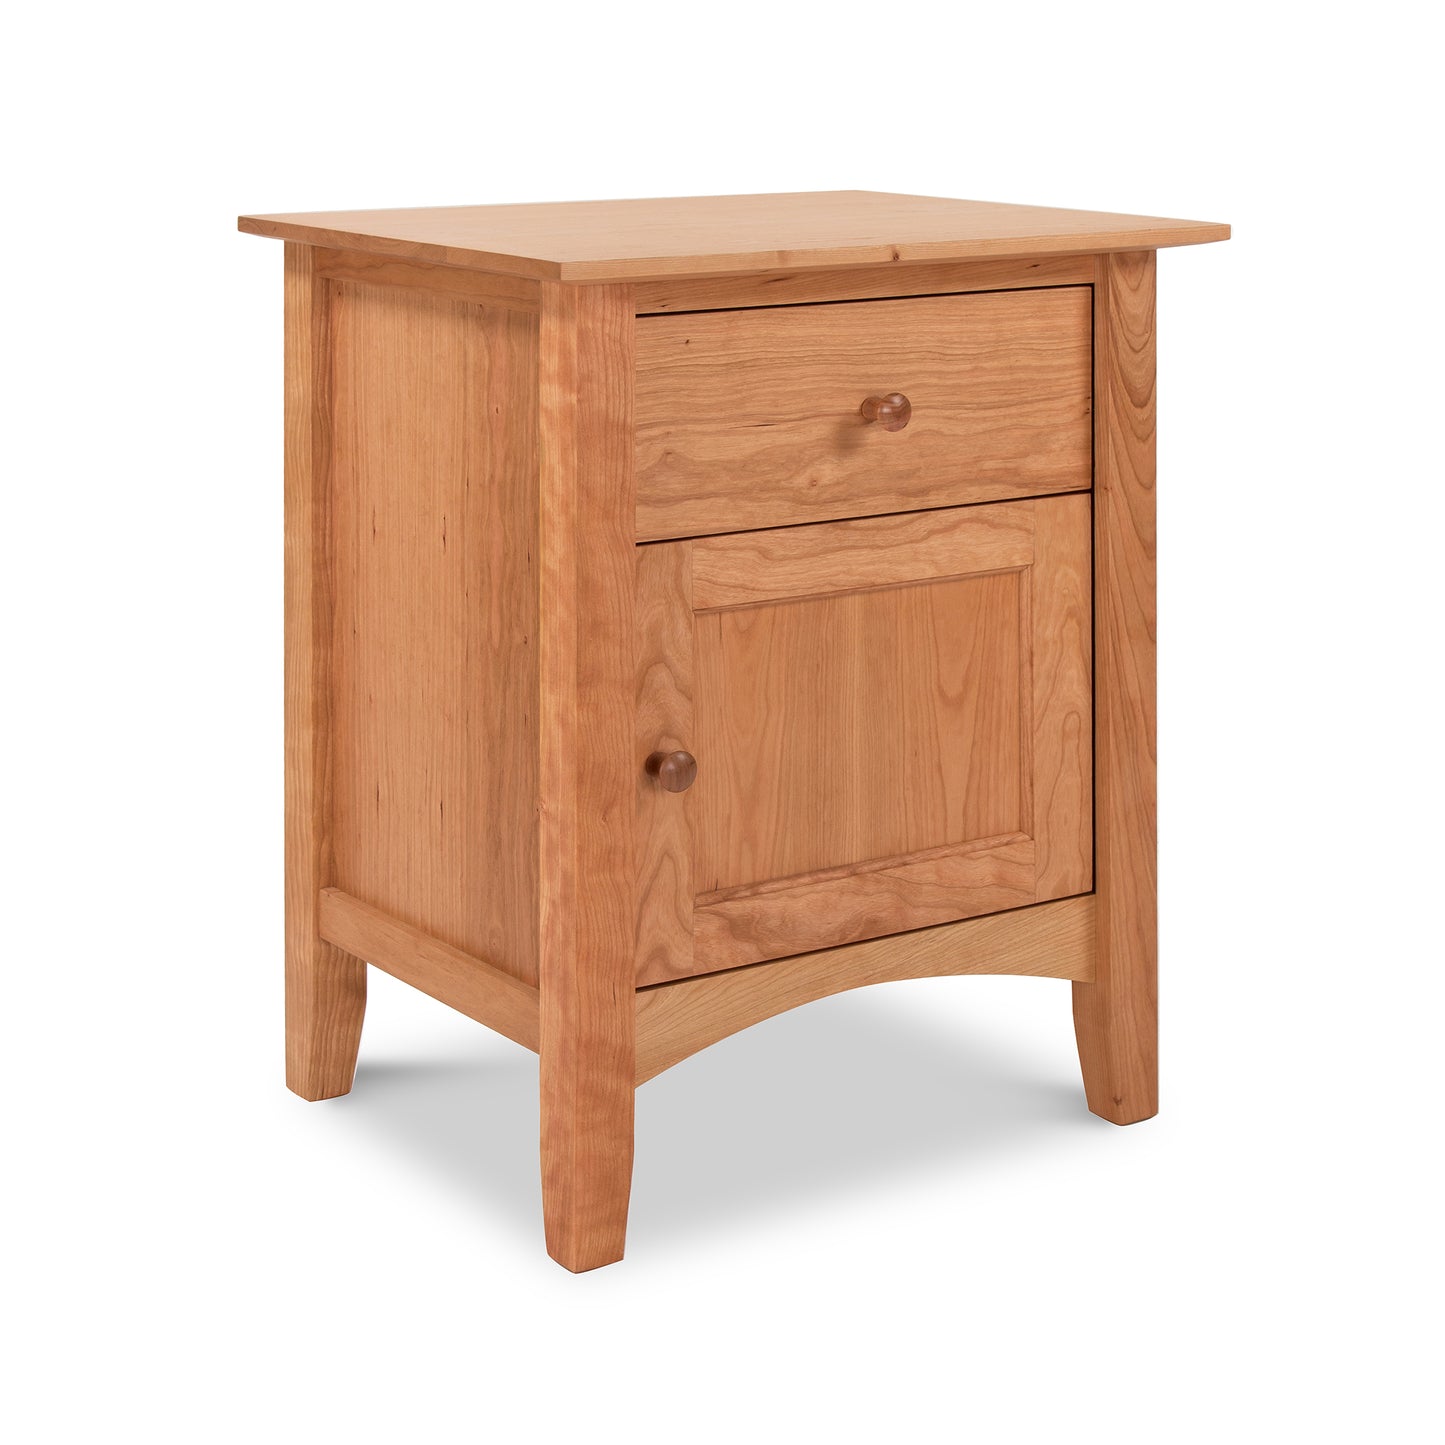 A Maple Corner Woodworks American Shaker 1-Drawer Nightstand with Door, crafted from sustainably harvested hardwoods, featuring a smooth top, isolated against a white background. The stand displays a light natural wood finish.